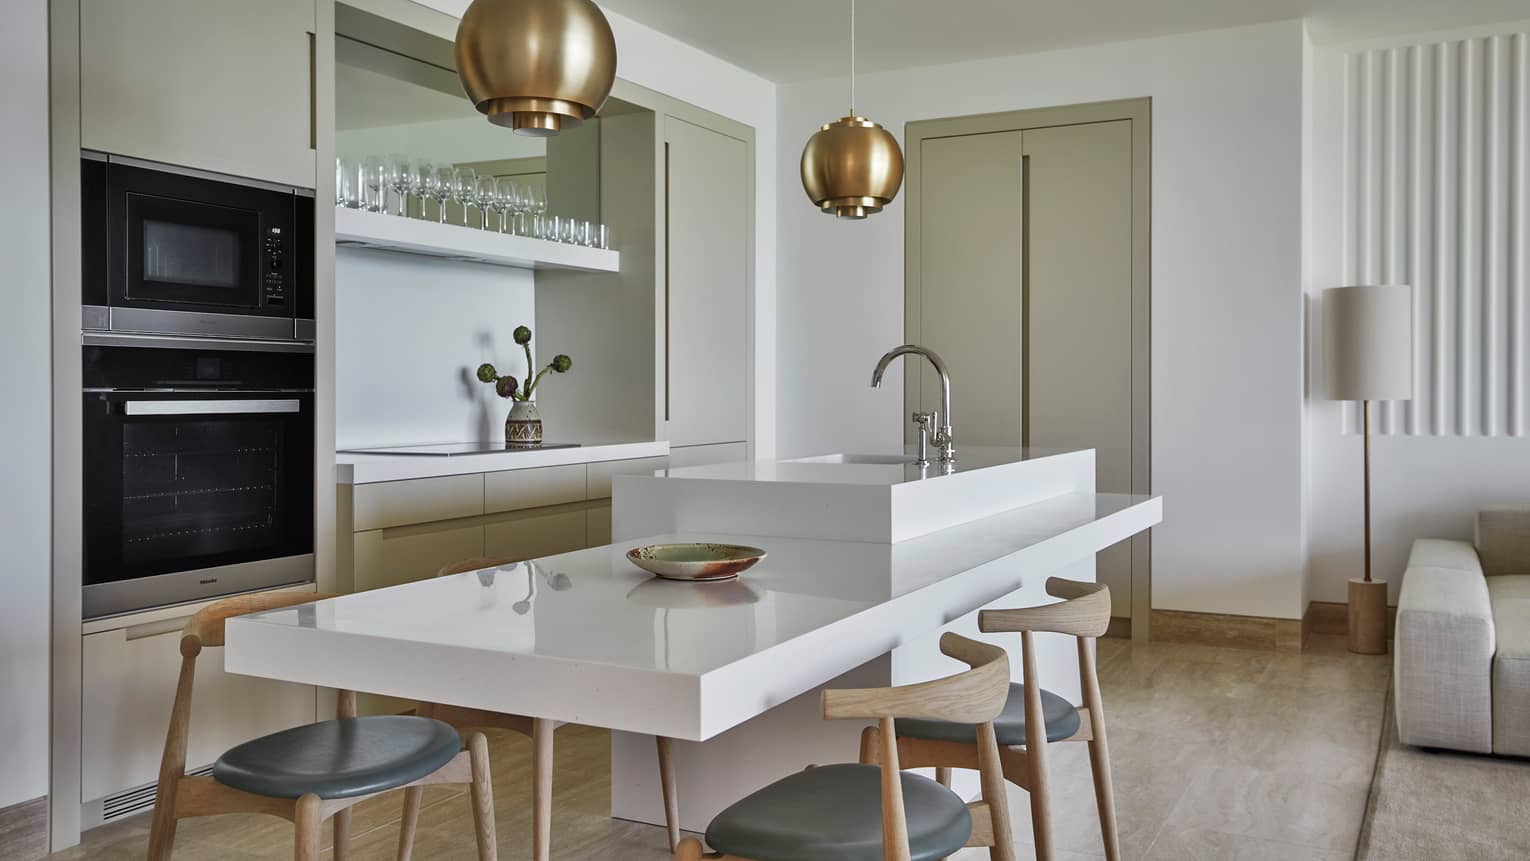 A sleek, modern in-suite kitchen in whites and beiges, featuring a large white serving island with wooden chairs and a sink.